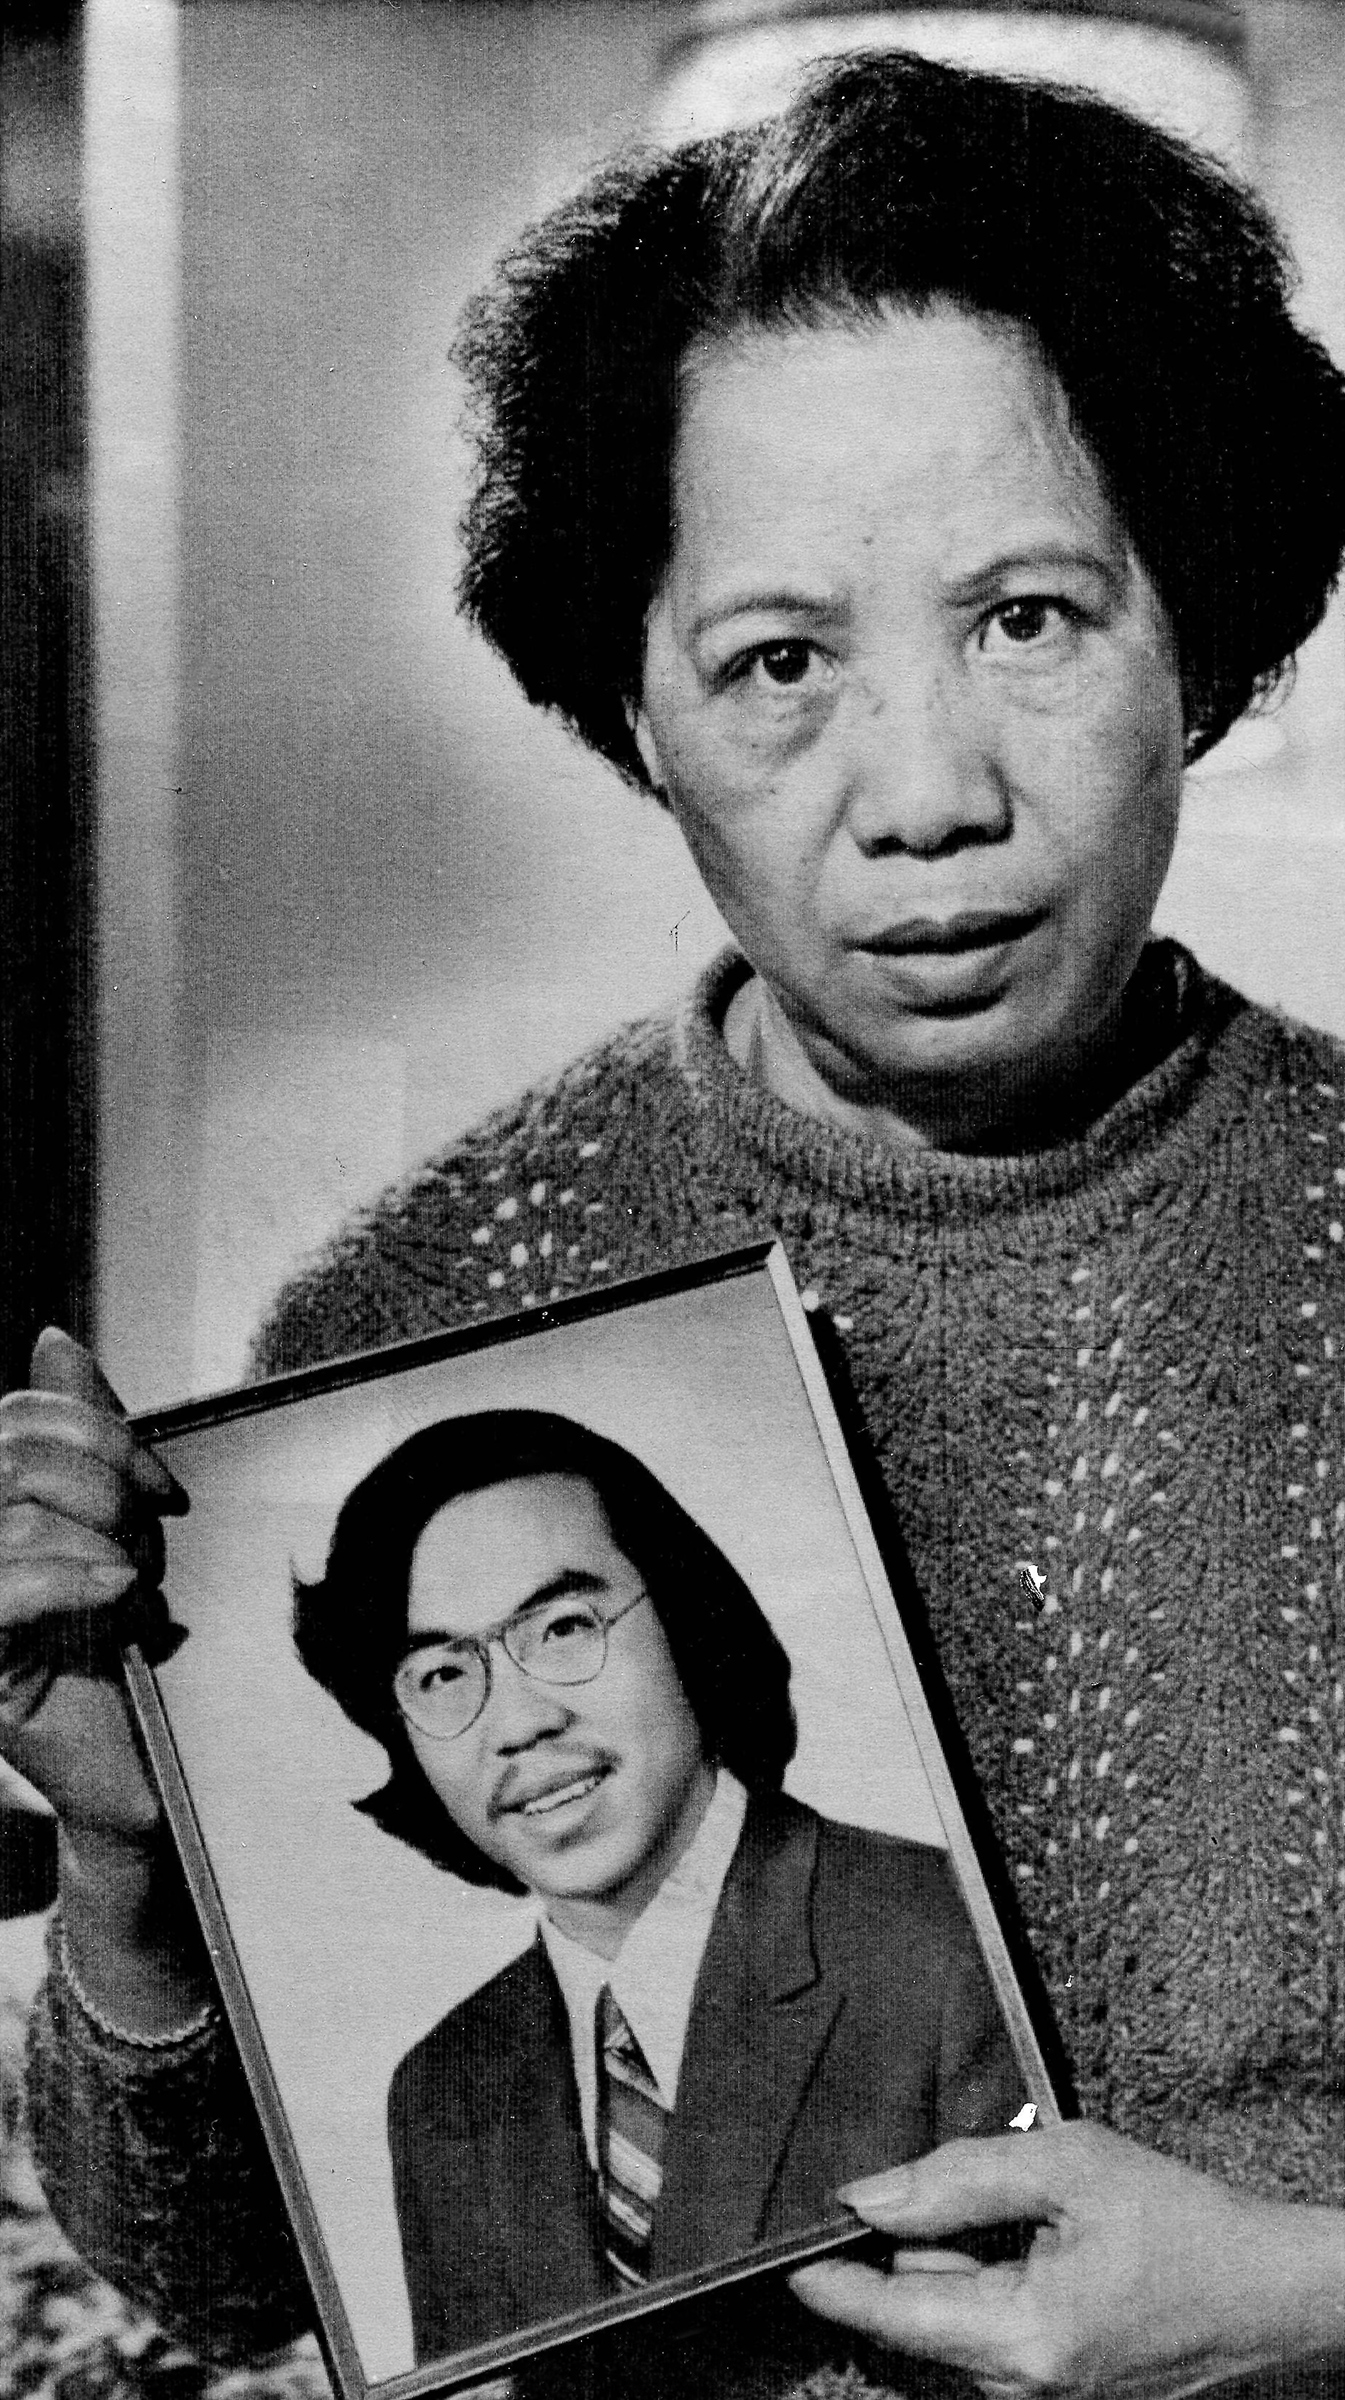 Lily Chin holds a photograph of her son Vincent, 27, who was beaten to death on June 23, 1982, in a photo made Nov. 2, 1983. A federal grand jury returned a criminal indictment on federal civil rights charges against two white East Detroit men who were place on probation after admitting they beat the Chinese-American man to death with a baseball bat. Ronald Ebens, 44, and his stepson, Michael Nitz, 25, were charged in a two-count indictment.